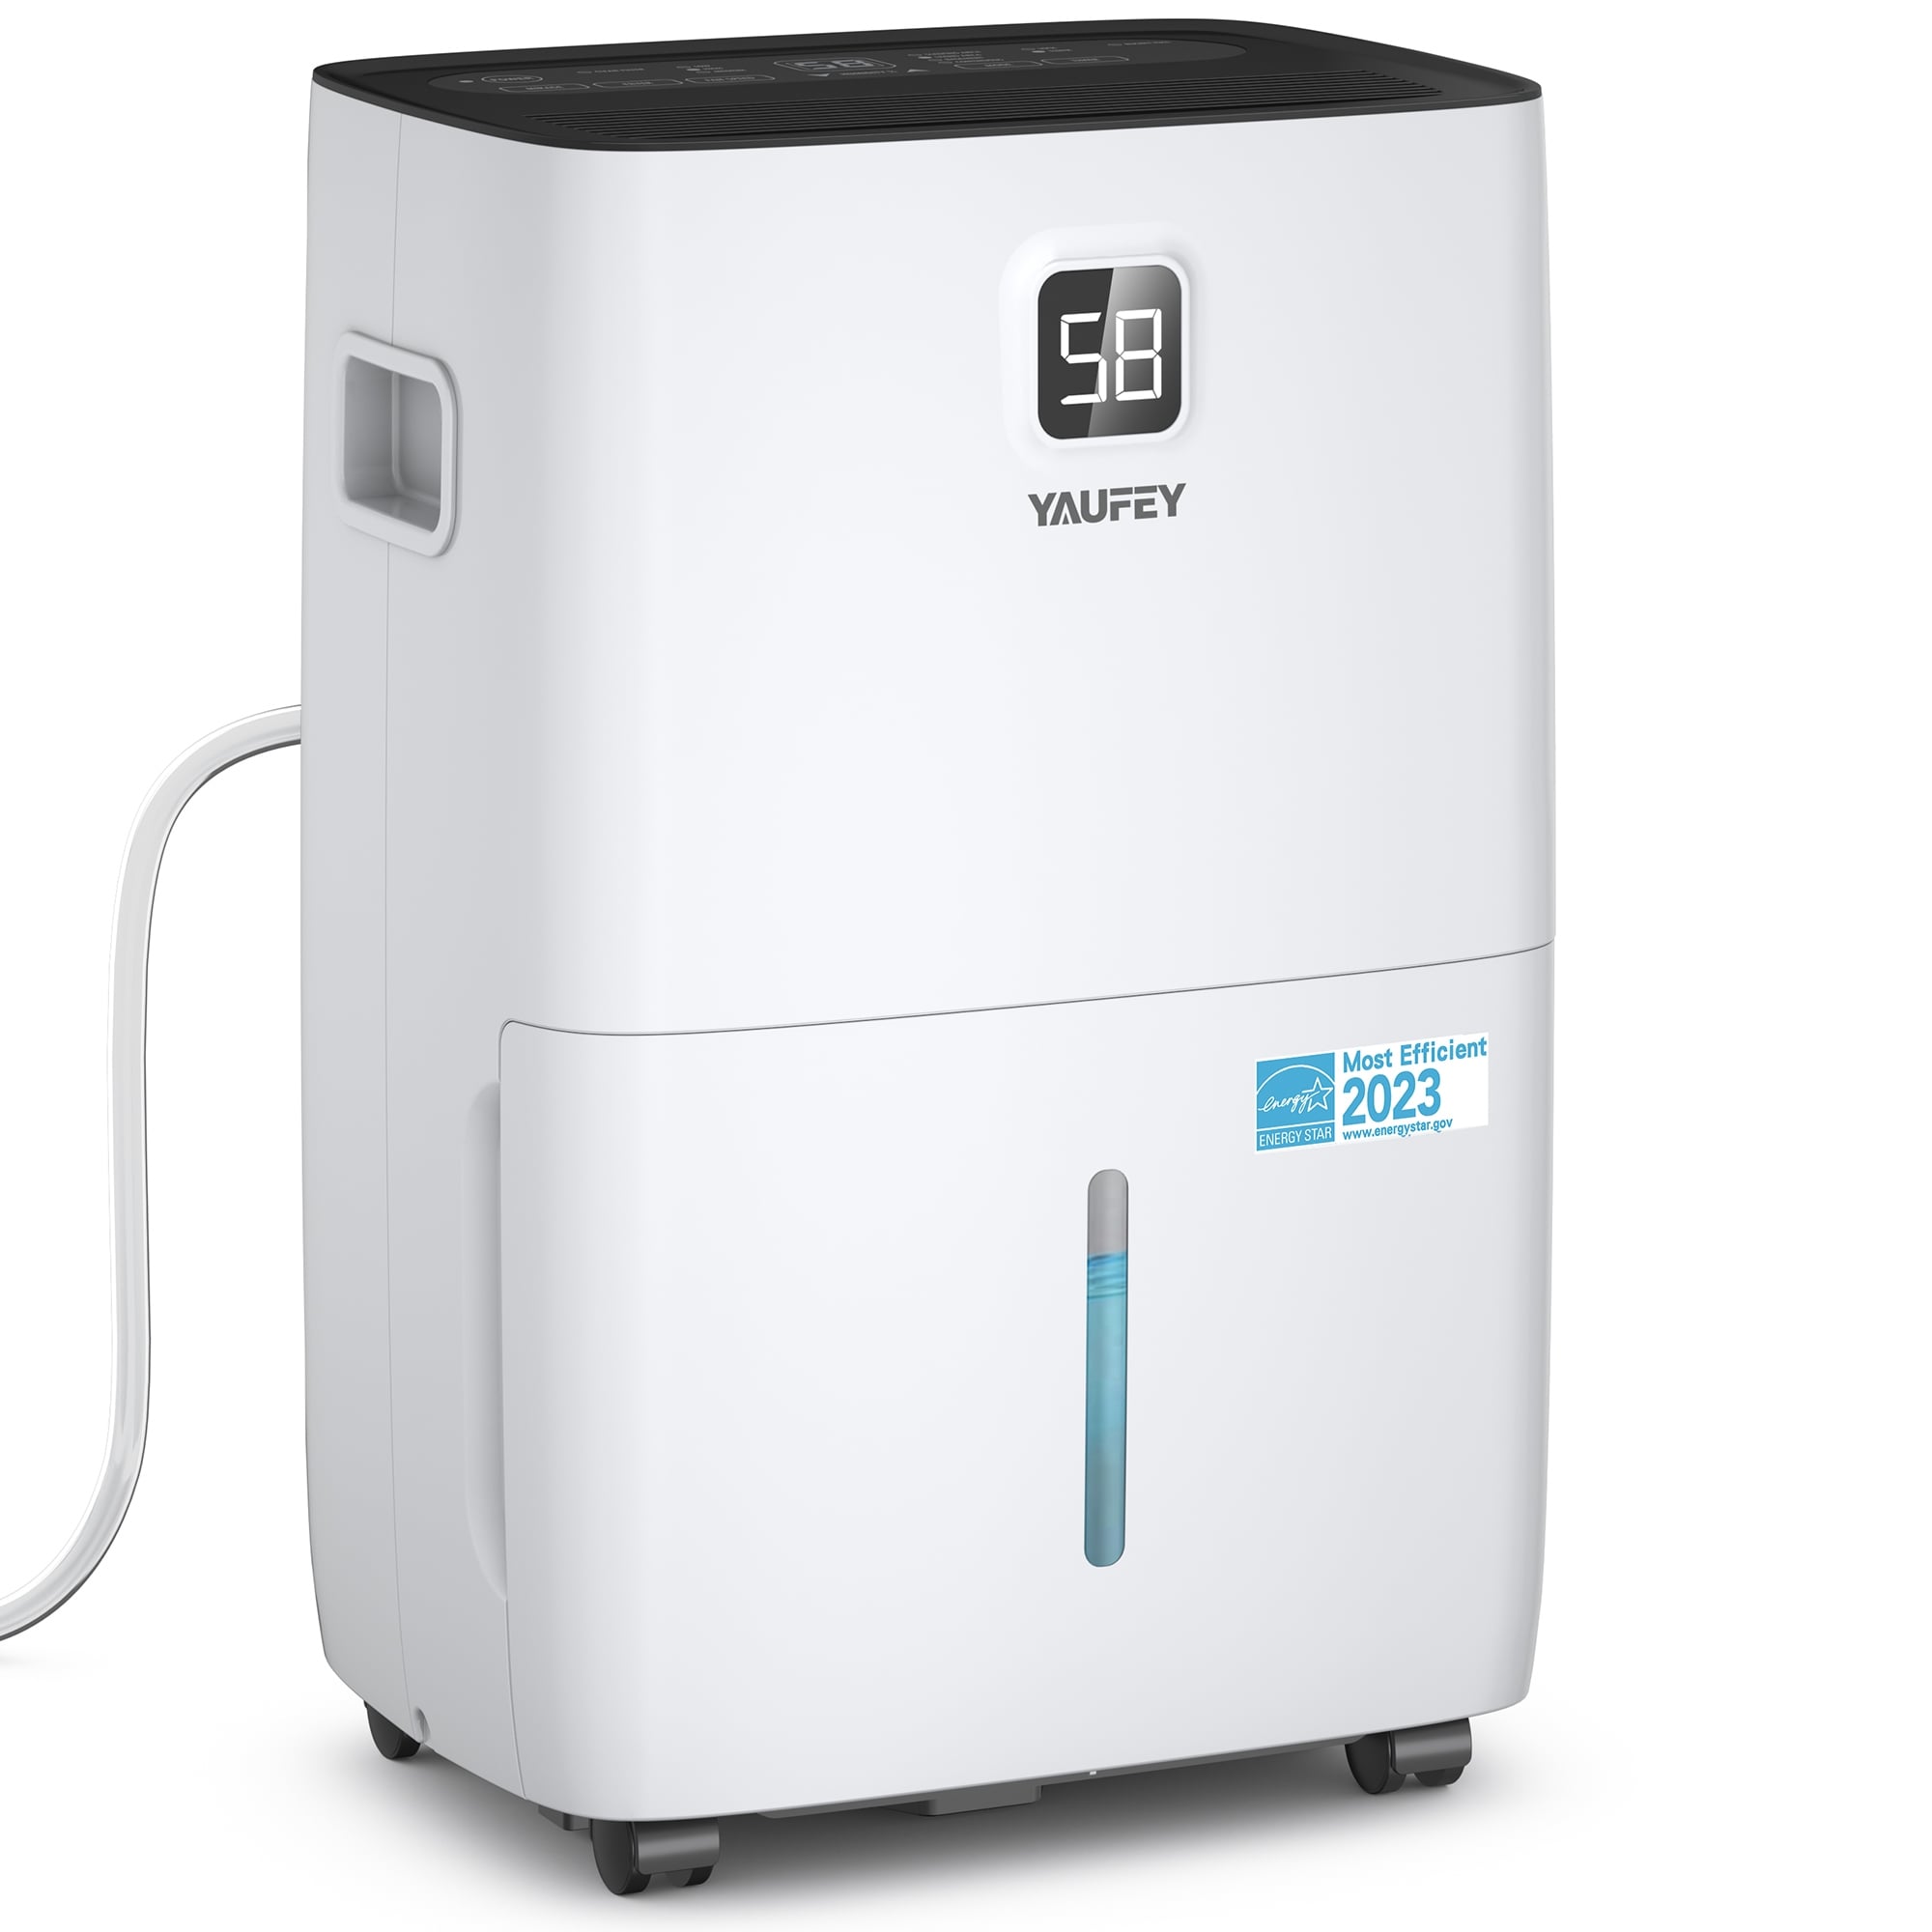 Waykar 80-Pint Energy Star Rated Dehumidifier for Rooms up to